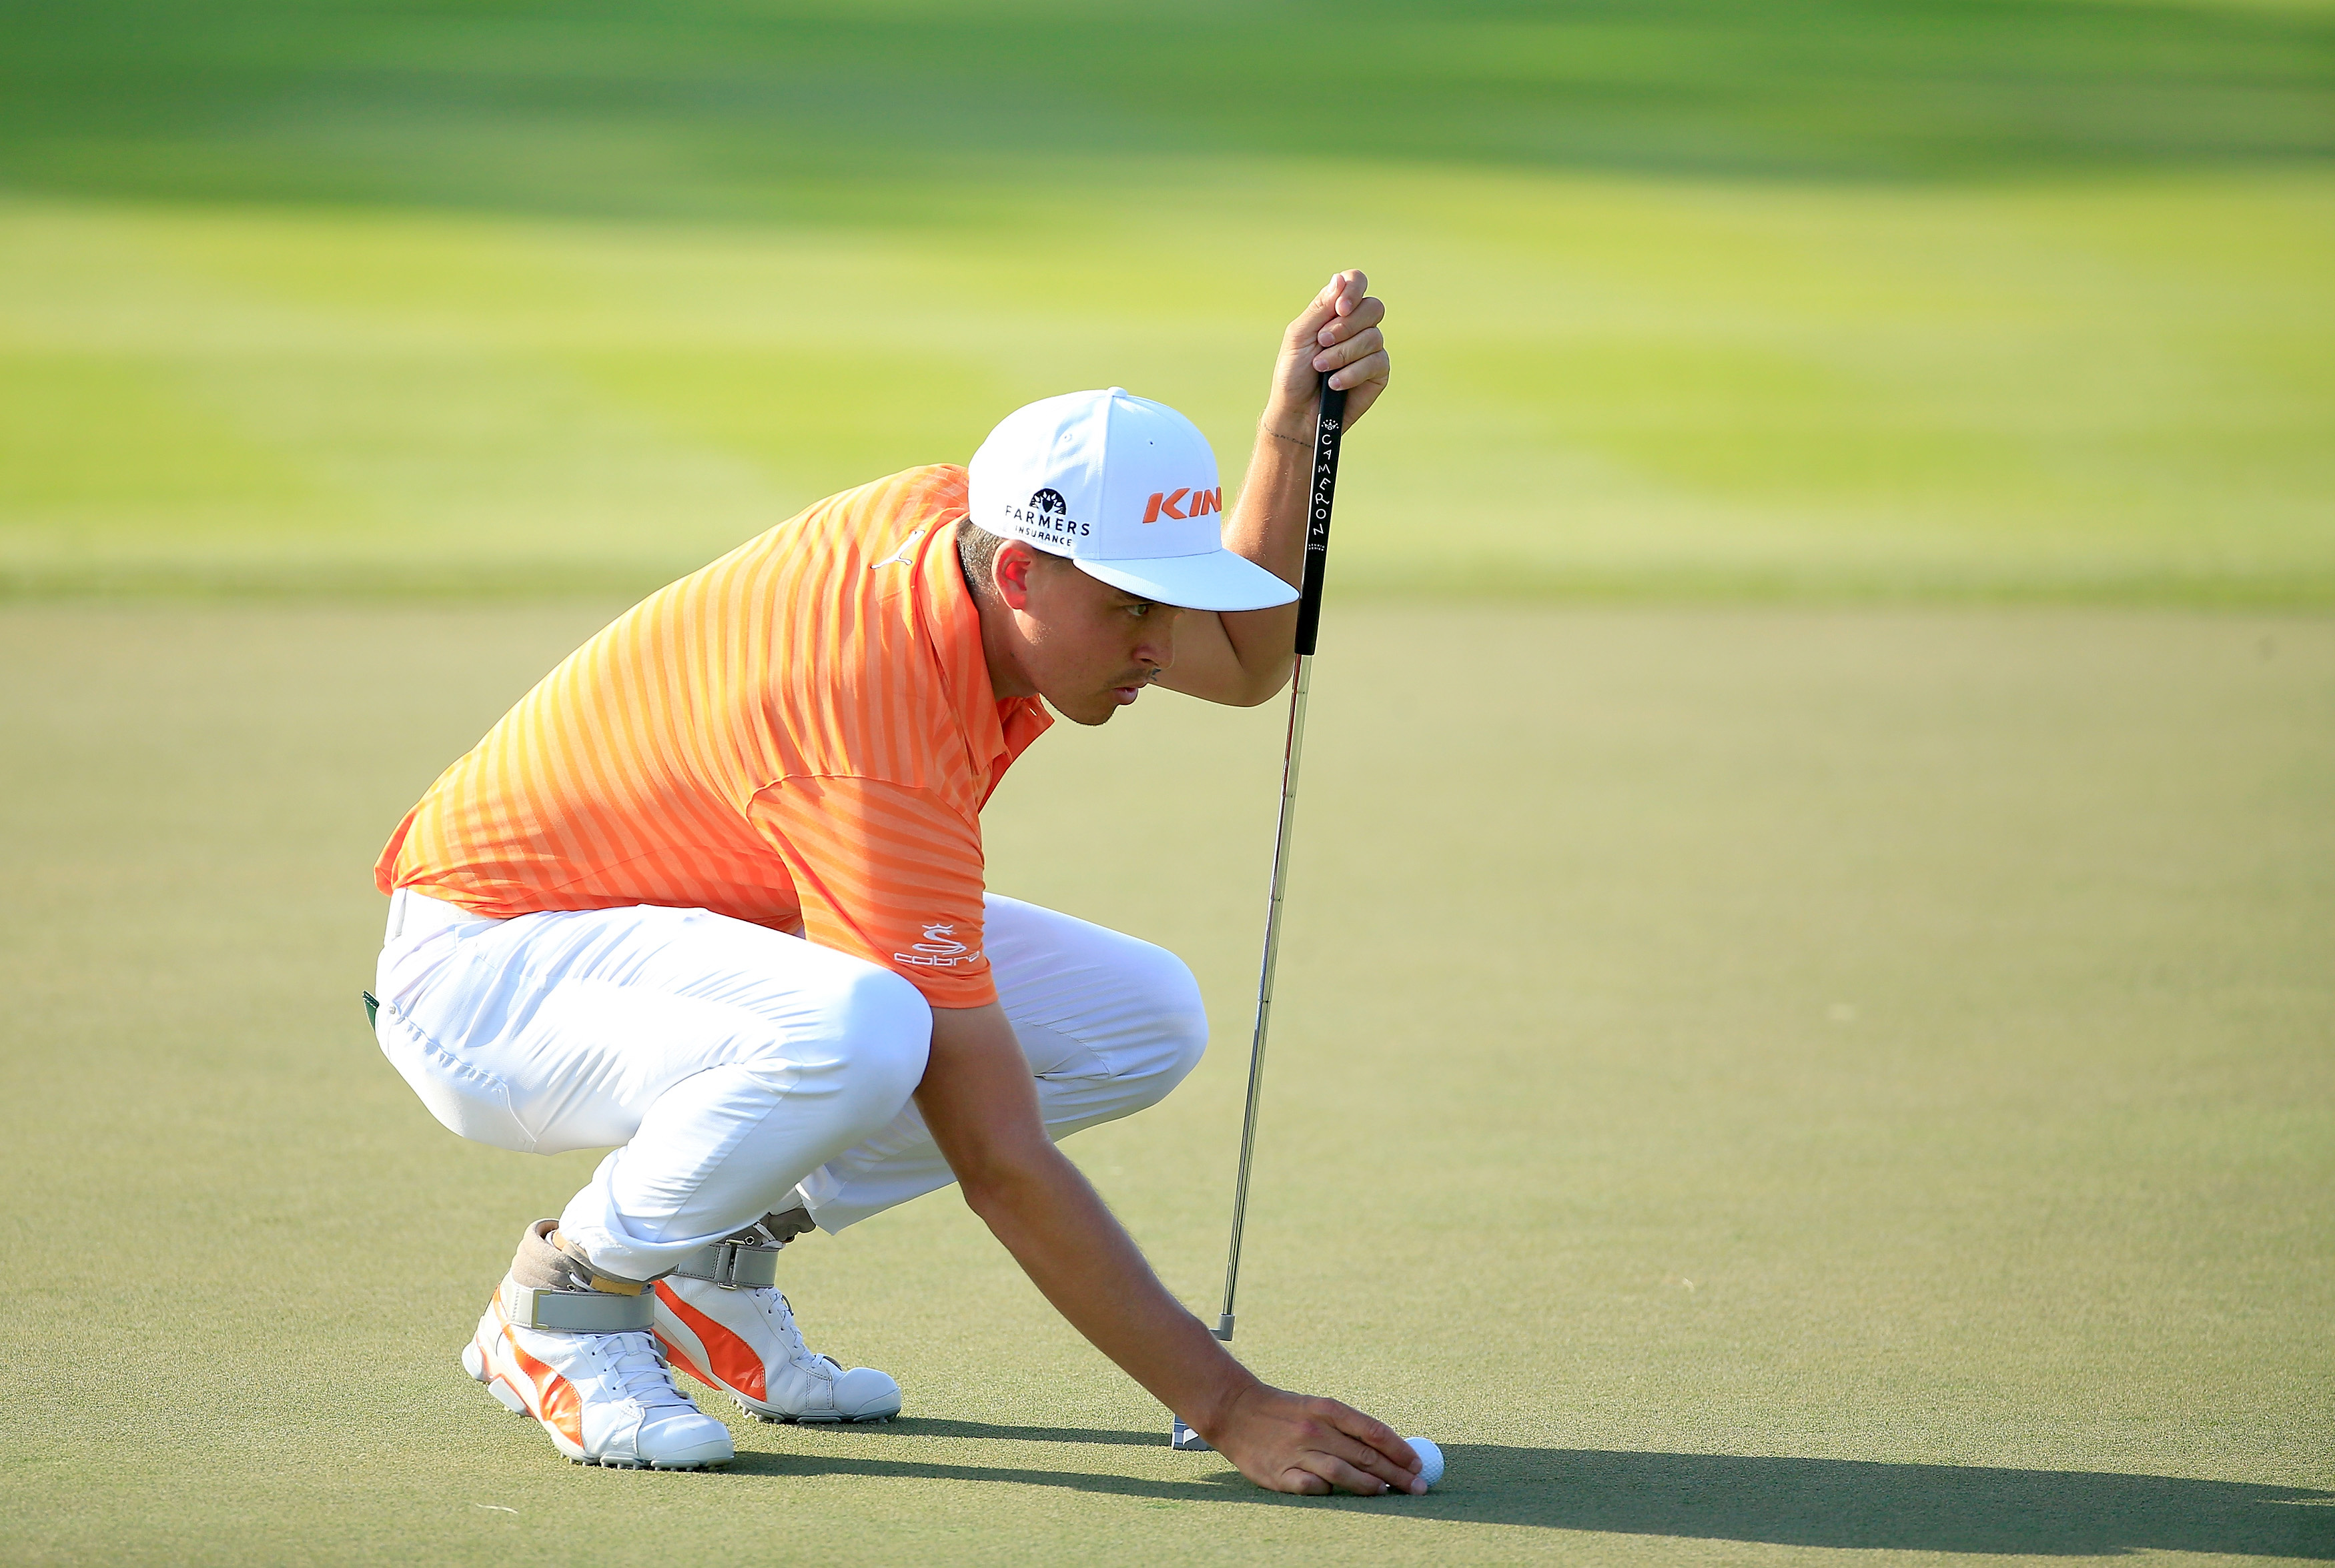 Puma is ready to bring Rickie Fowler's 